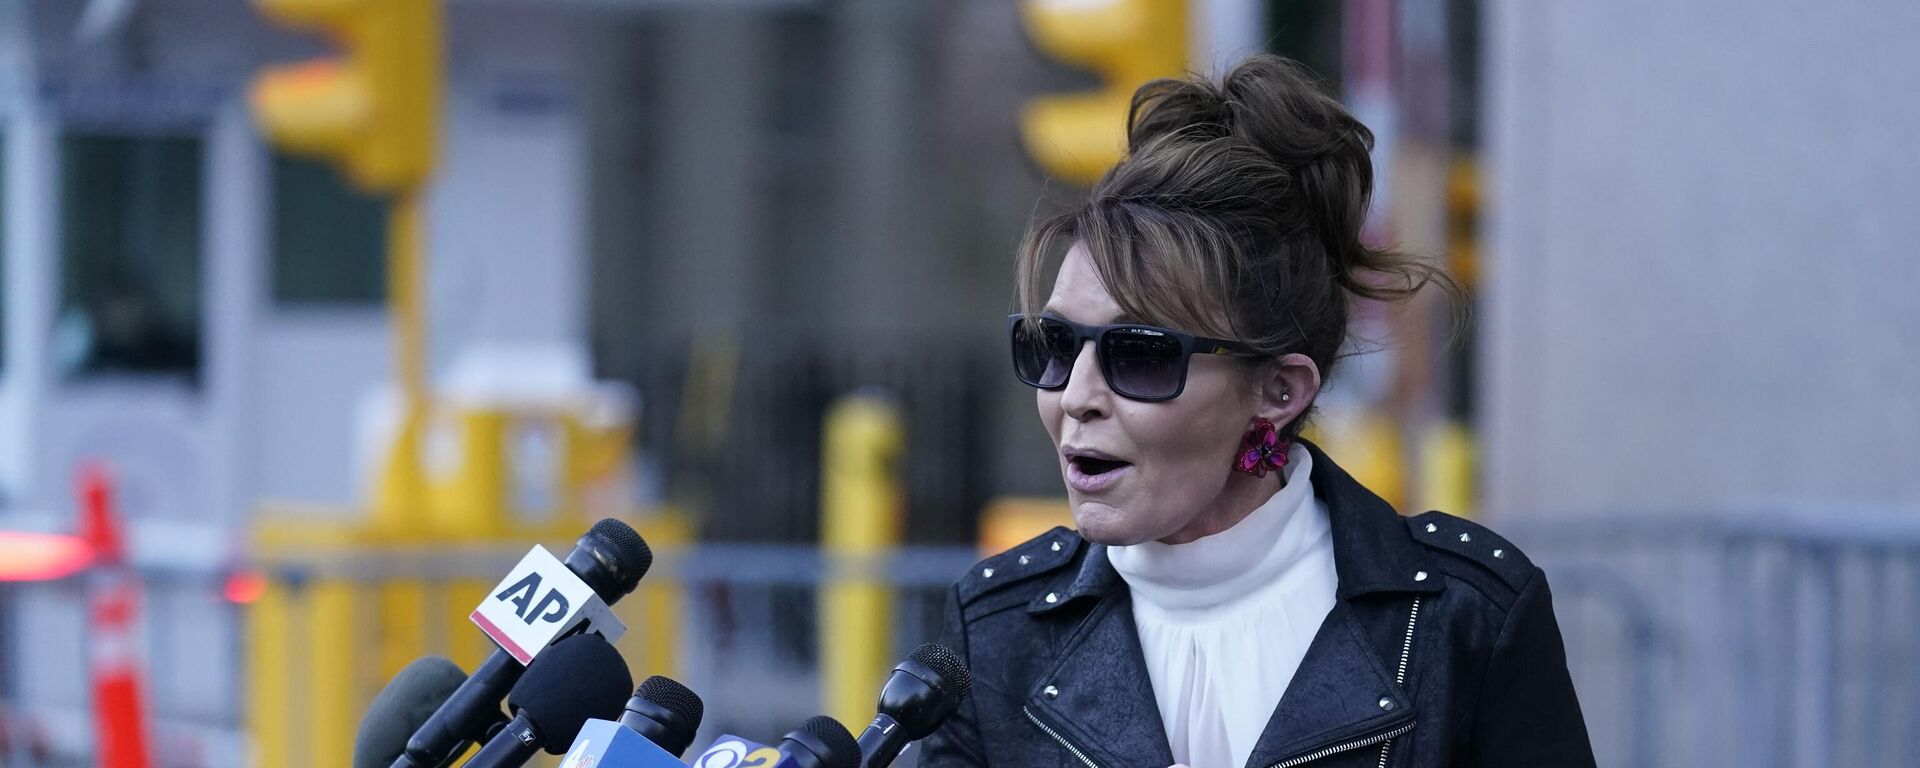 Former Alaska Gov. Sarah Palin speaks briefly to reporters as she leaves a courthouse in New York, Monday, Feb. 14, 2022. A judge said Monday he’ll dismiss a libel lawsuit that Palin filed against The New York Times, claiming the newspaper damaged her reputation with an editorial falsely linking her campaign rhetoric to a mass shooting. U.S. District Judge Jed Rakoff made the ruling with a jury still deliberating at the trial where the former Alaska governor and vice-presidential candidate testified last week. - Sputnik International, 1920, 22.02.2023